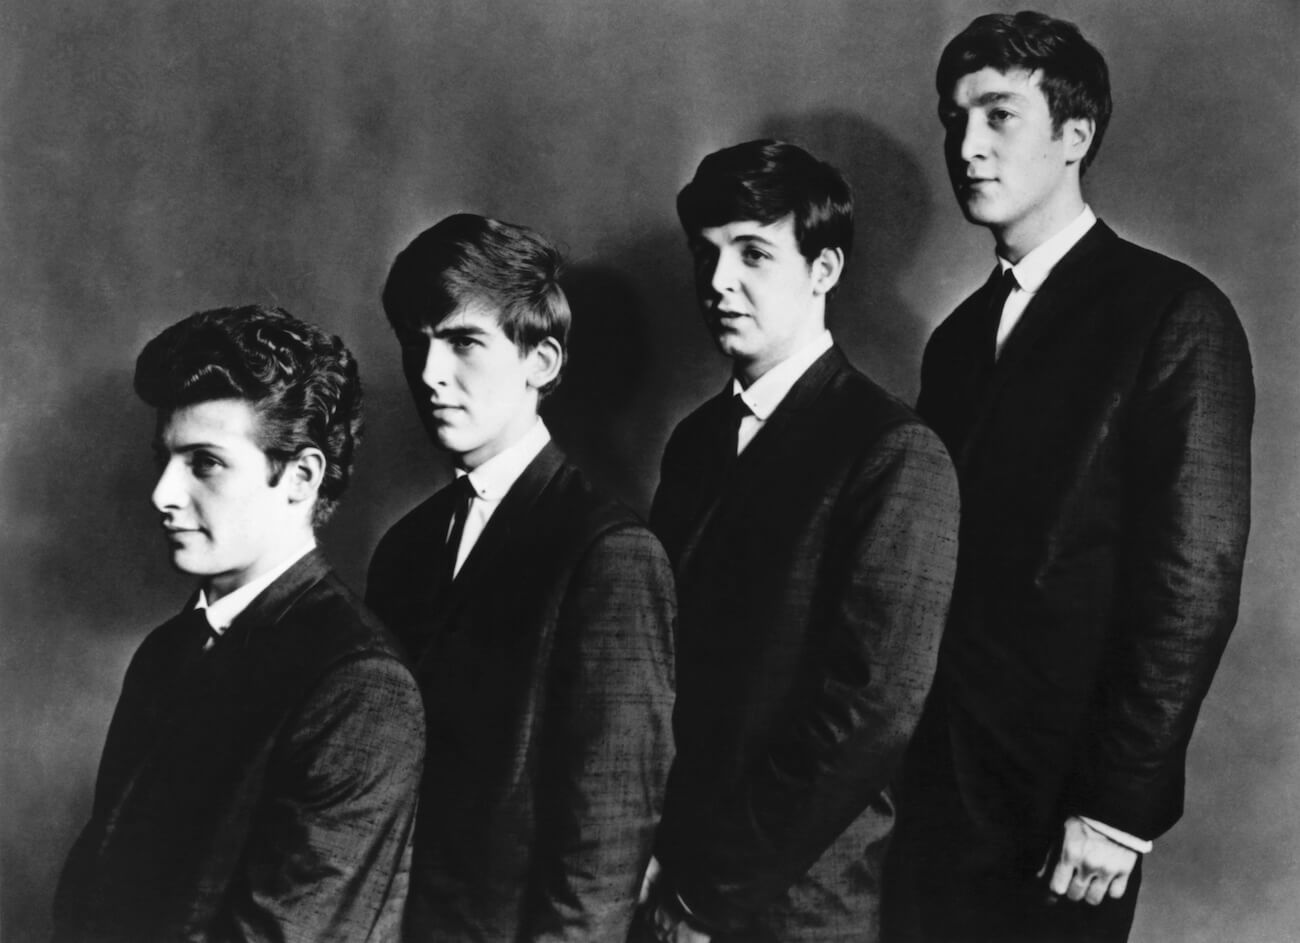 Paul McCartney and The Beatles posing in suits in 1962.